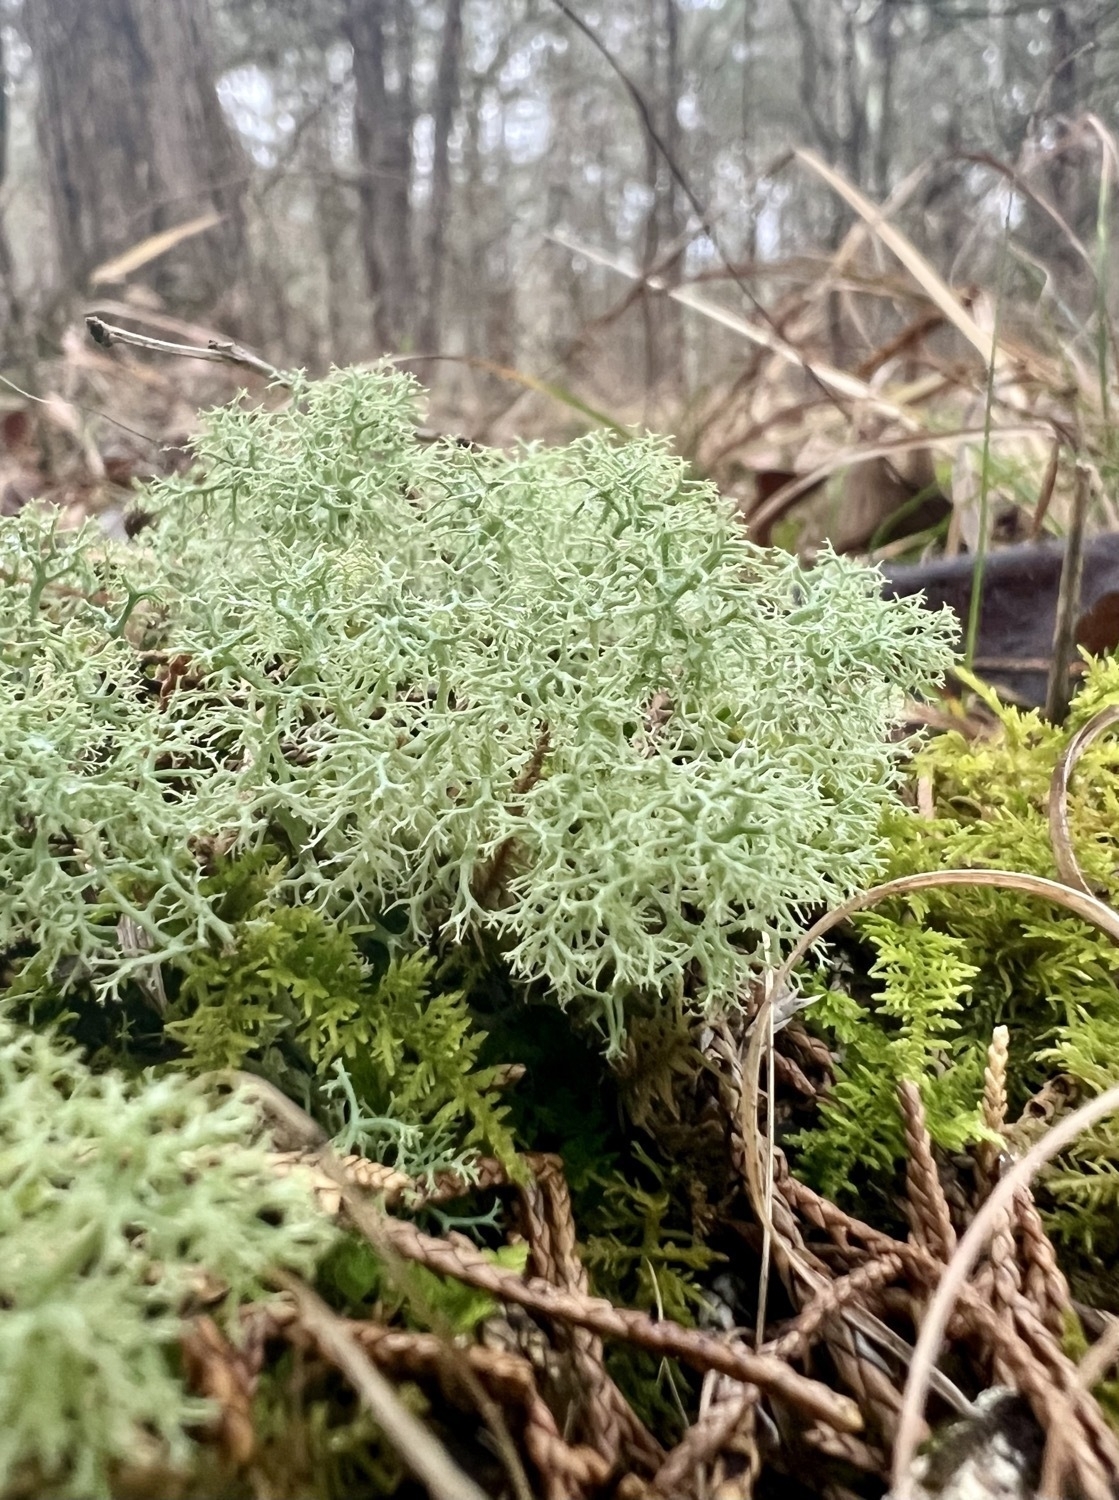 pale green lichen with many very tiny branches that looks like a kind of sponge. The lichen grows atop a darker green patch of lush moss on the forest floor with a background of winter woodland